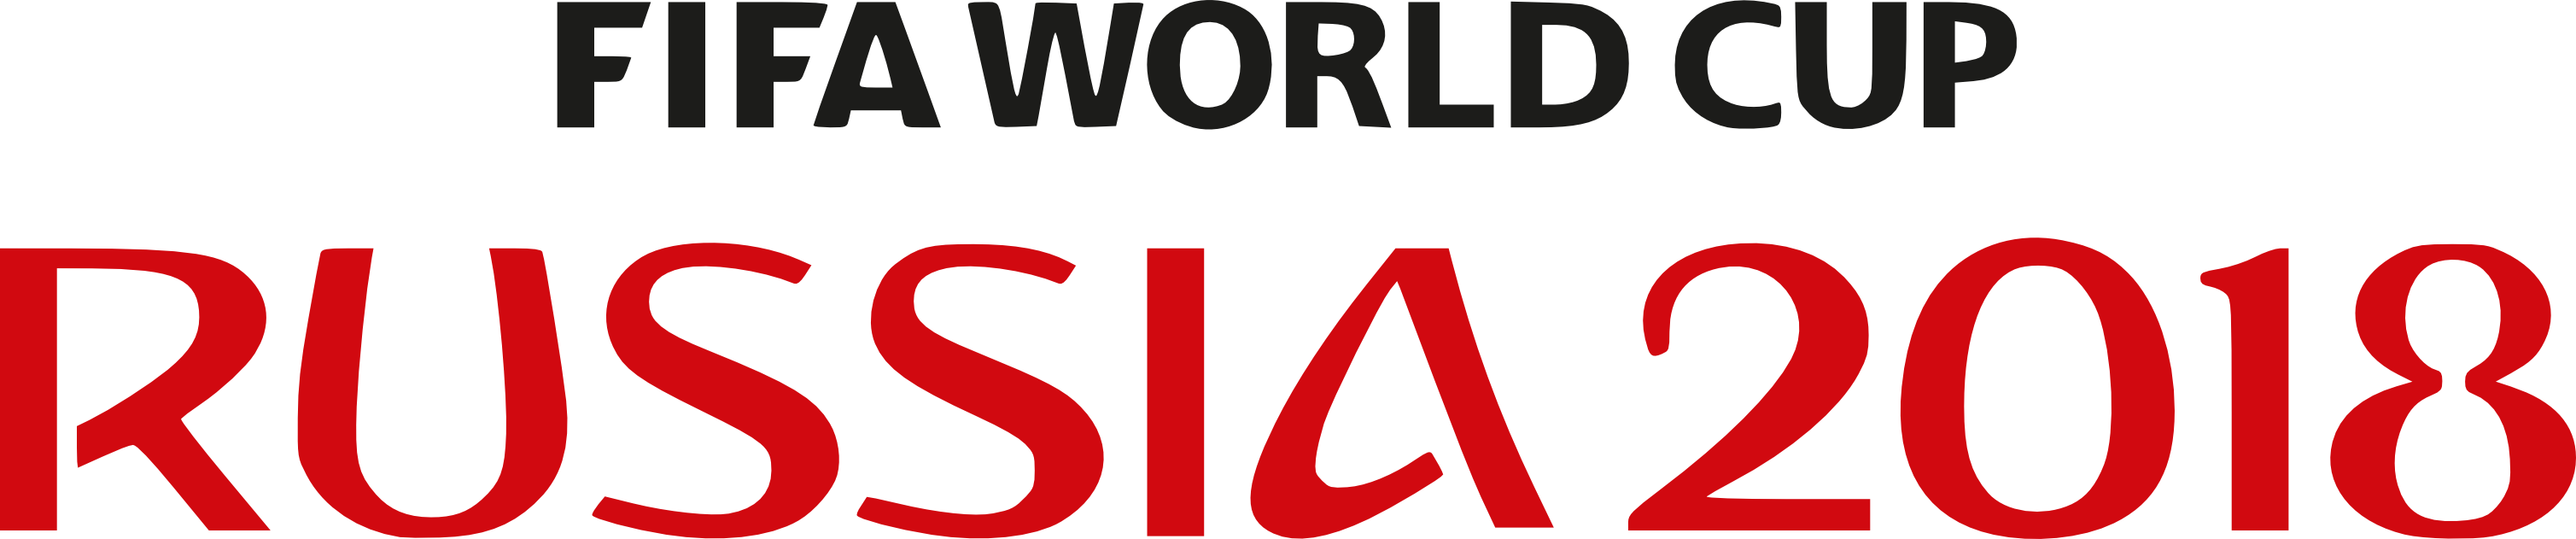 Fifa World Cup Russia 2018 Logo Text